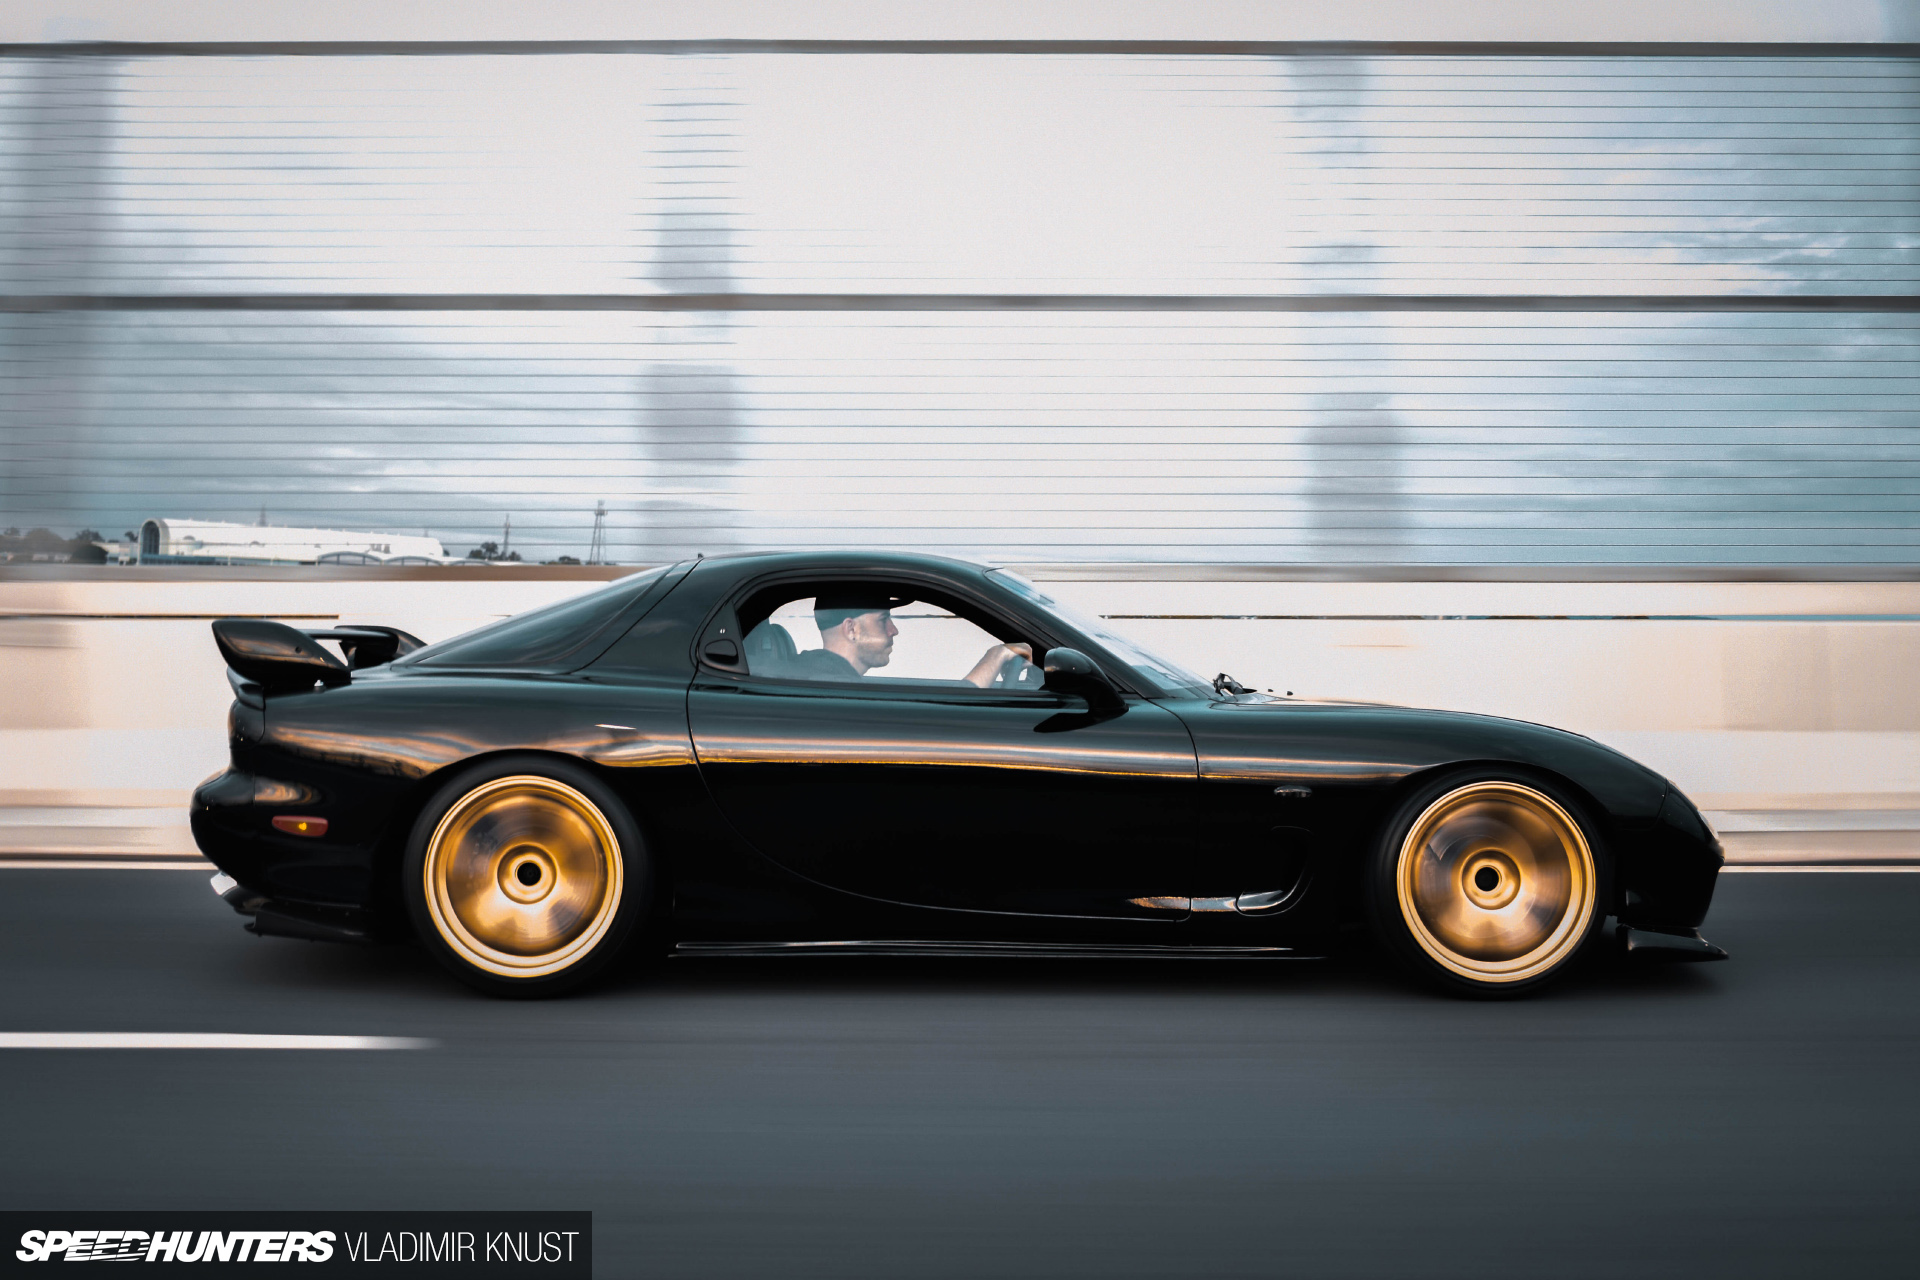 Taking The Time To Build An RX-7 The Right Way - Speedhunters